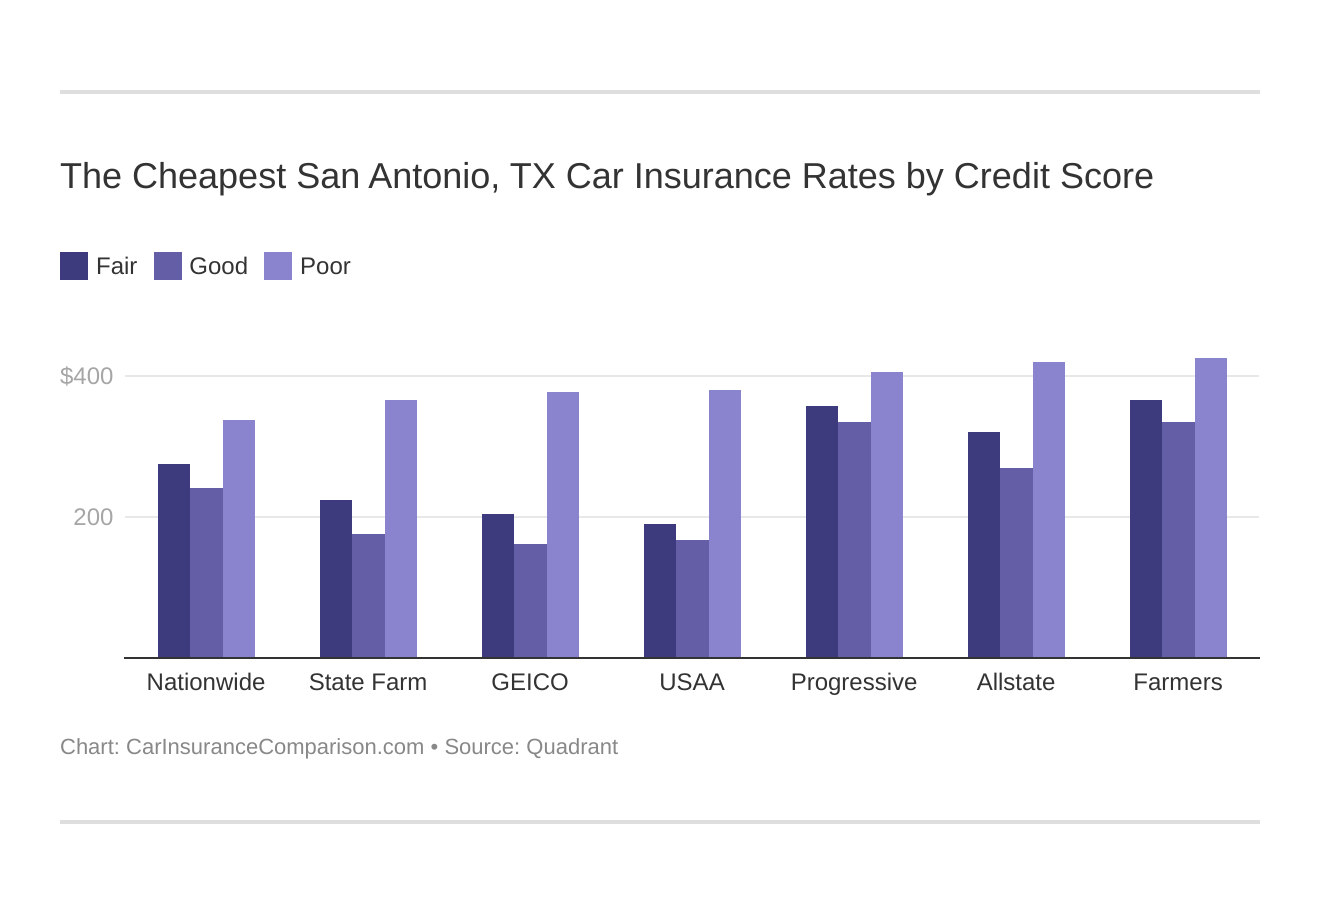 The Cheapest San Antonio, TX Car Insurance Rates by Credit Score